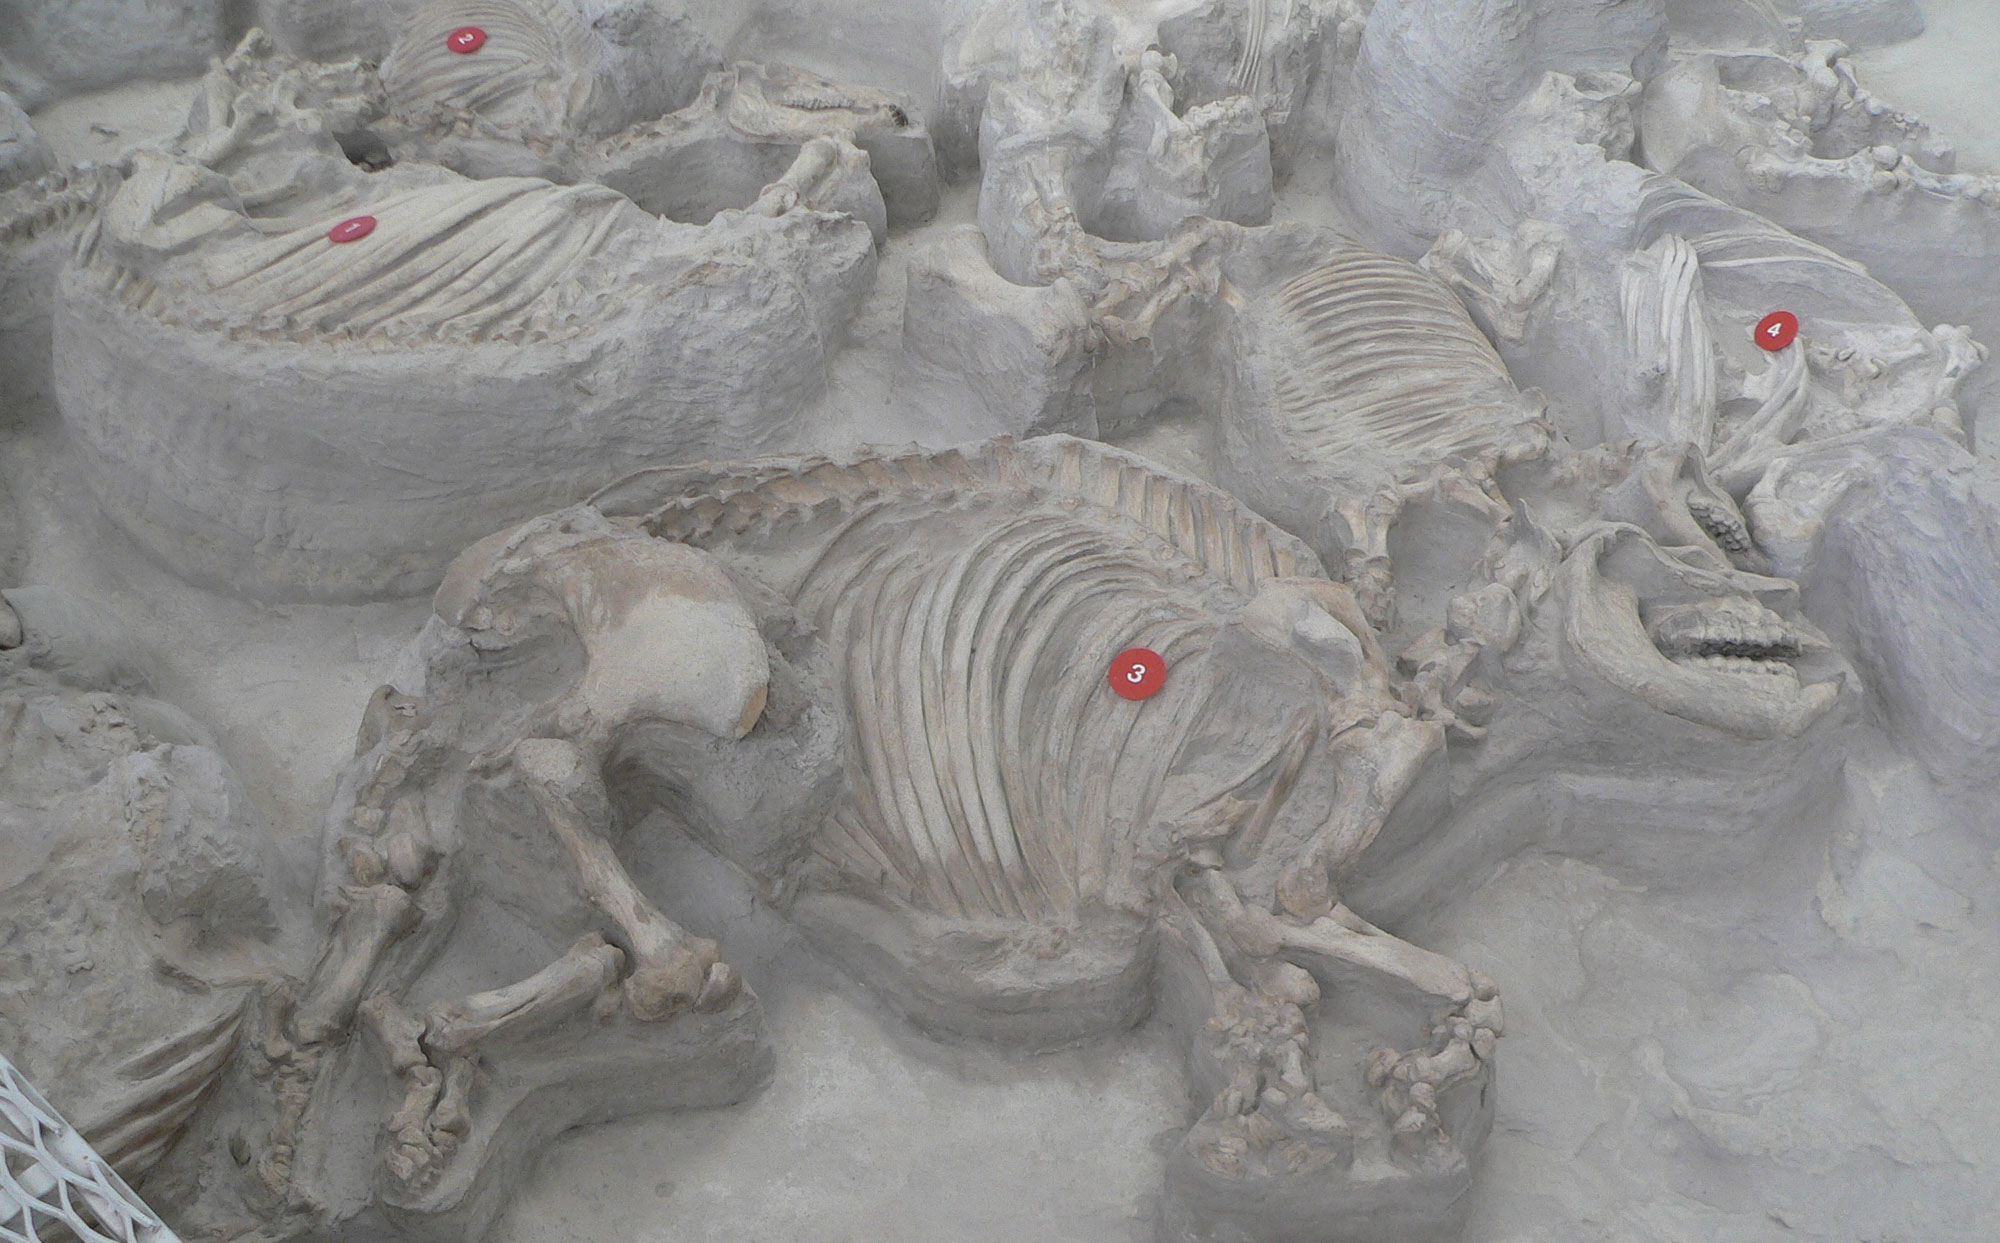 Photograph of a group of skeletons at Ashfall Fossil Beds State Park, Nebraska. The photo shows the articulated skeletons on rhinos laying scattered on the ground. The skeletons have been partially excavated so that they are exposed at the ground surface. They are preserved in a light gray rock. Each skeleton has been partially dug out of the rock, so it appears to be elevated on a pedestal.